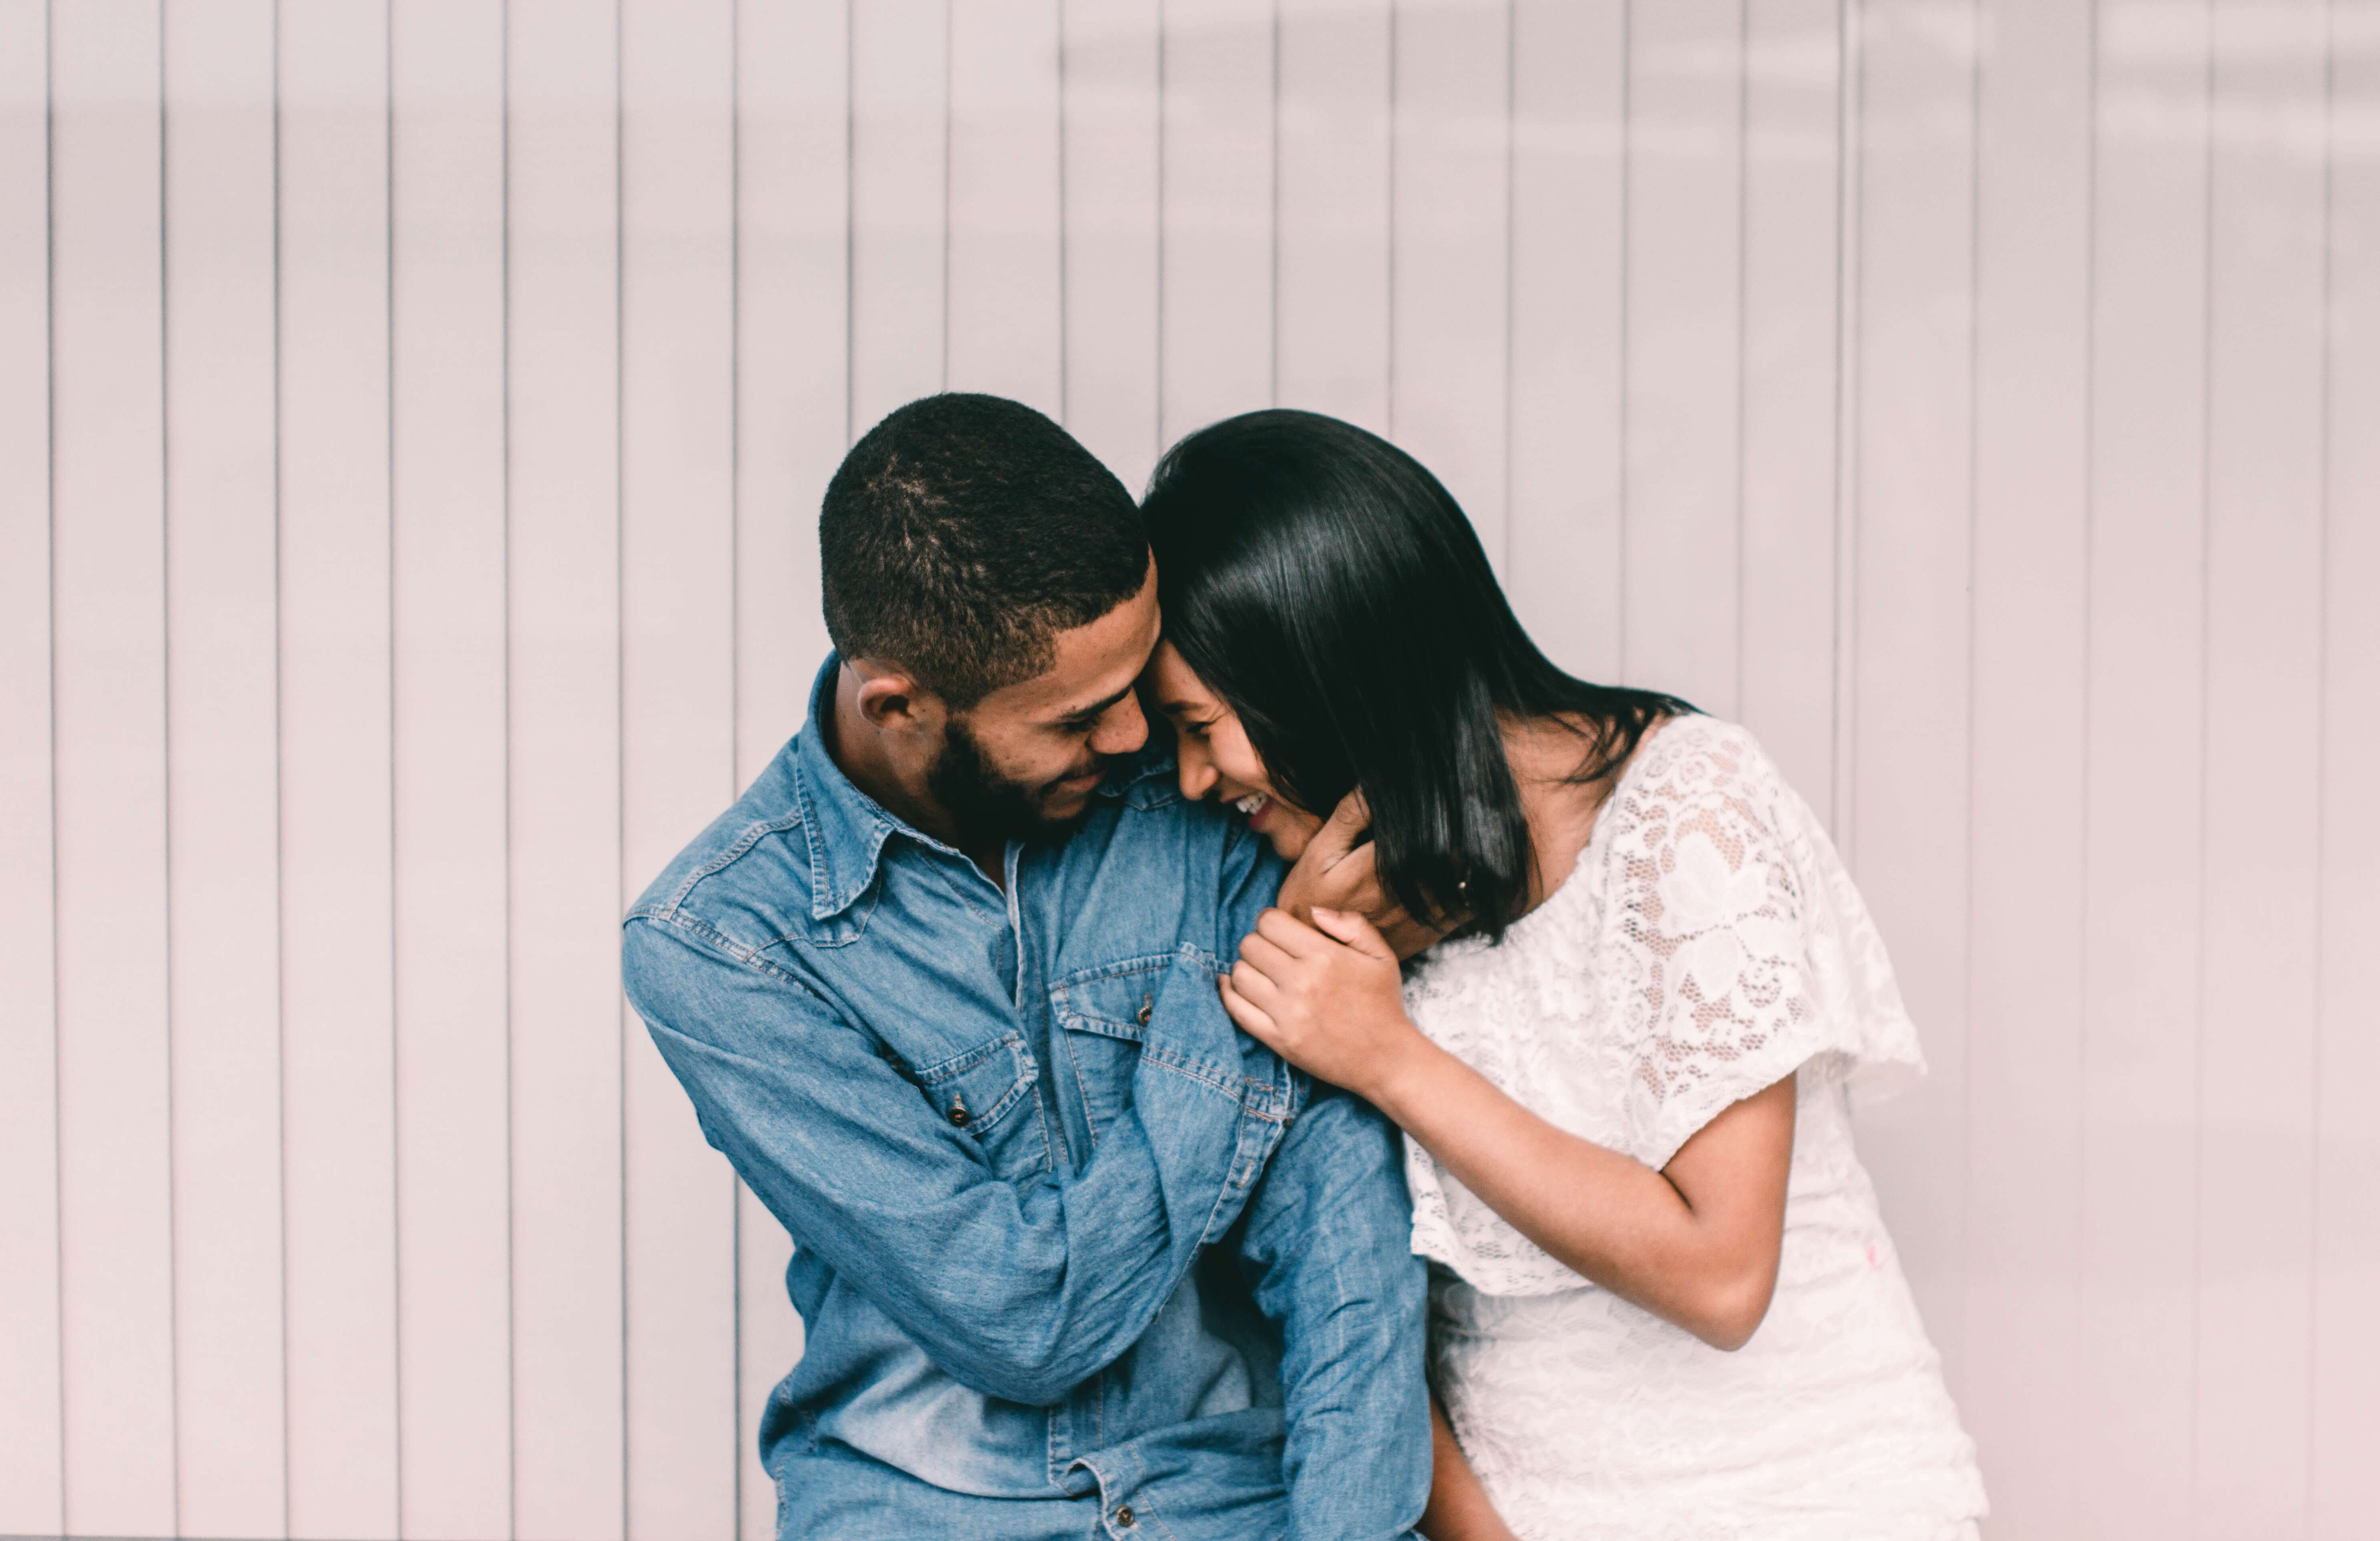 How to maintain healthy independence while social distancing with your partner